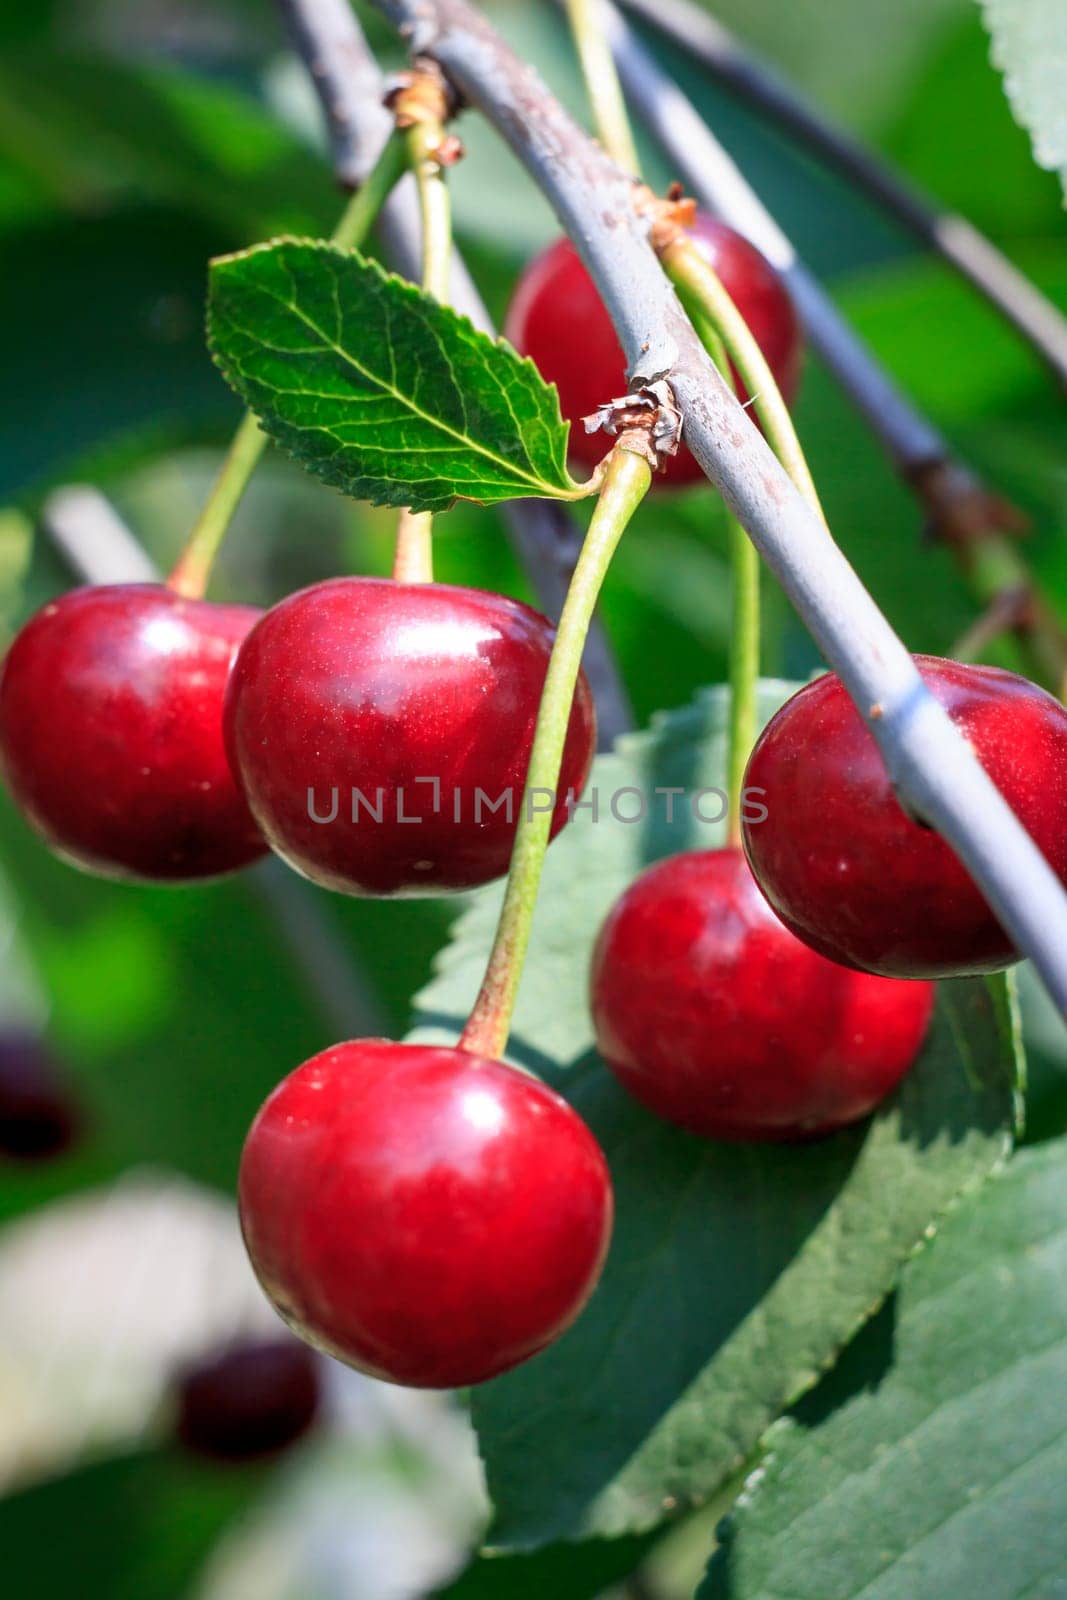 Ripe cherries on the tree in the garden in sunny summer day with green leaves on the background. Shallow depth of field.